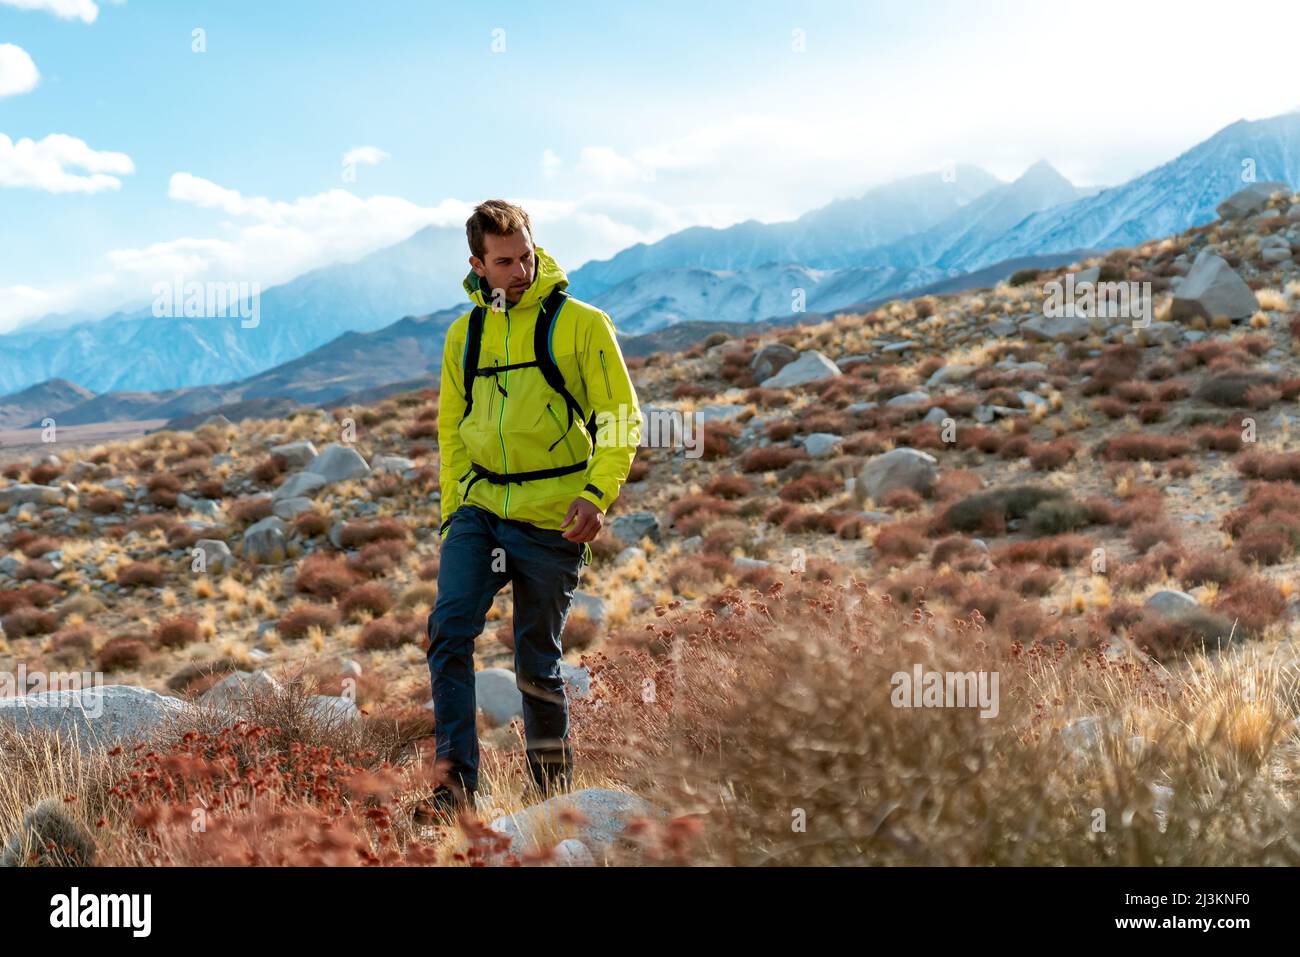 Man in a bright yellow jacket hiking in the Eastern Sierra; California, United States of America Stock Photo